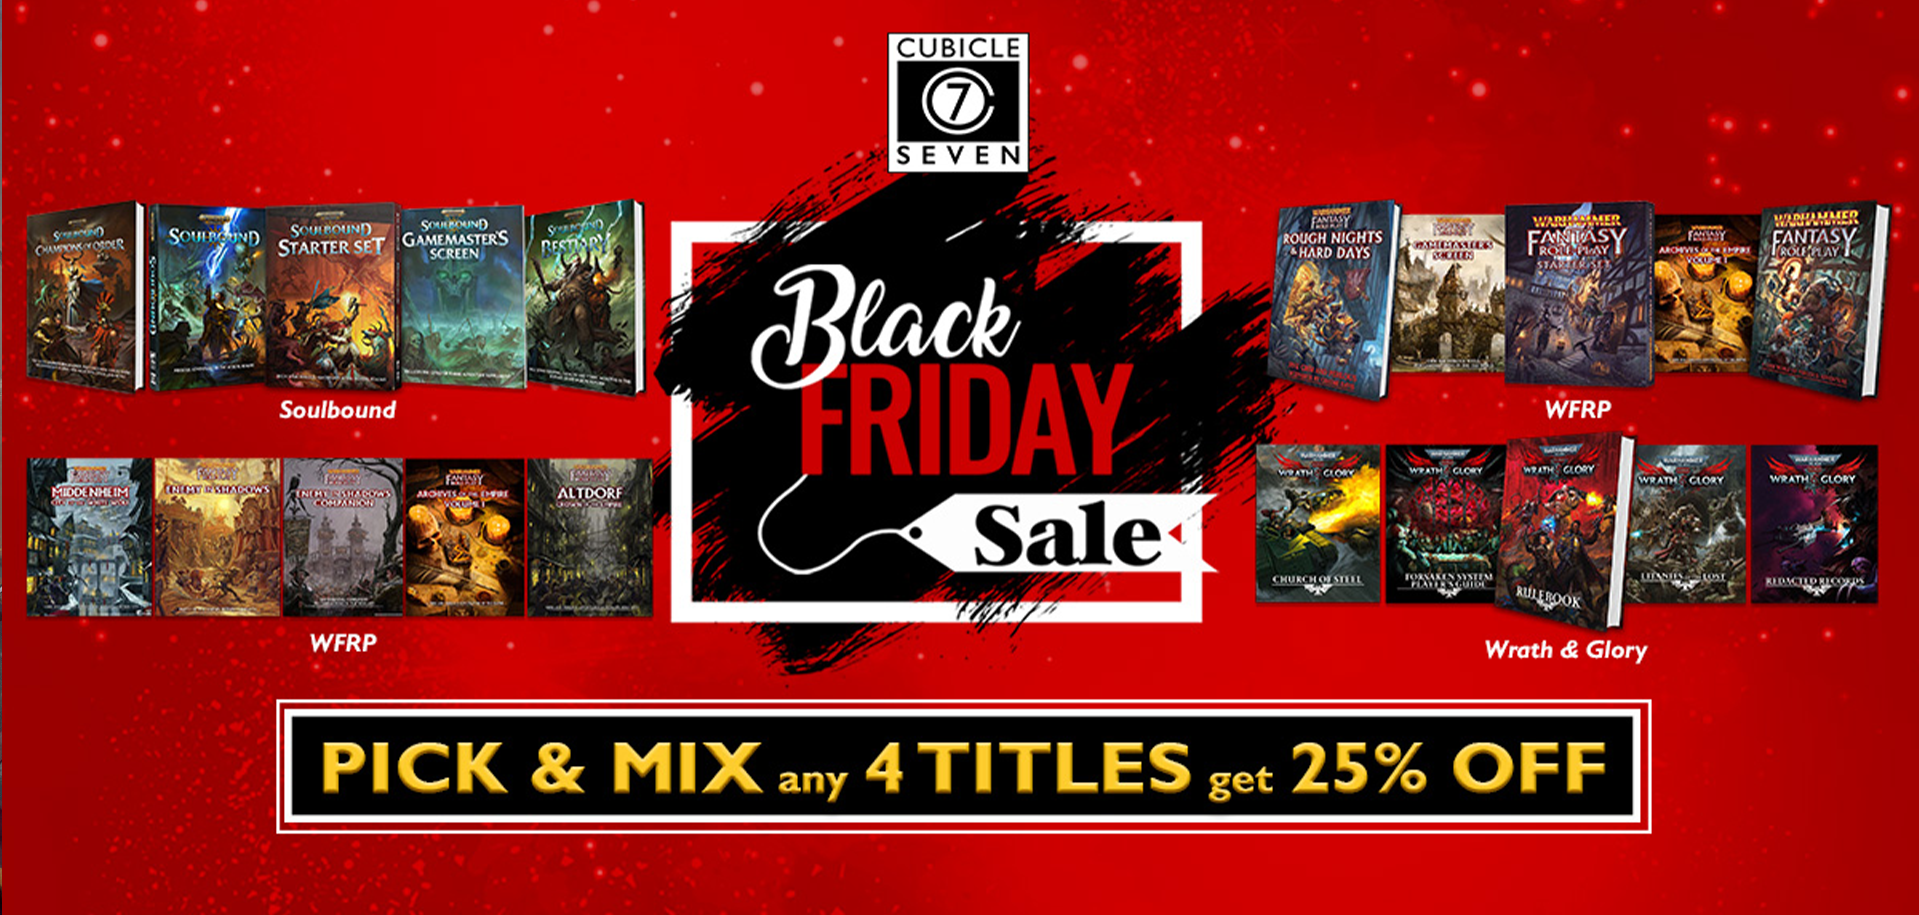 Cubicle 7 Black Friday 2022 Sale On Now! - Pick & Mix any 4 titles and get 25% off